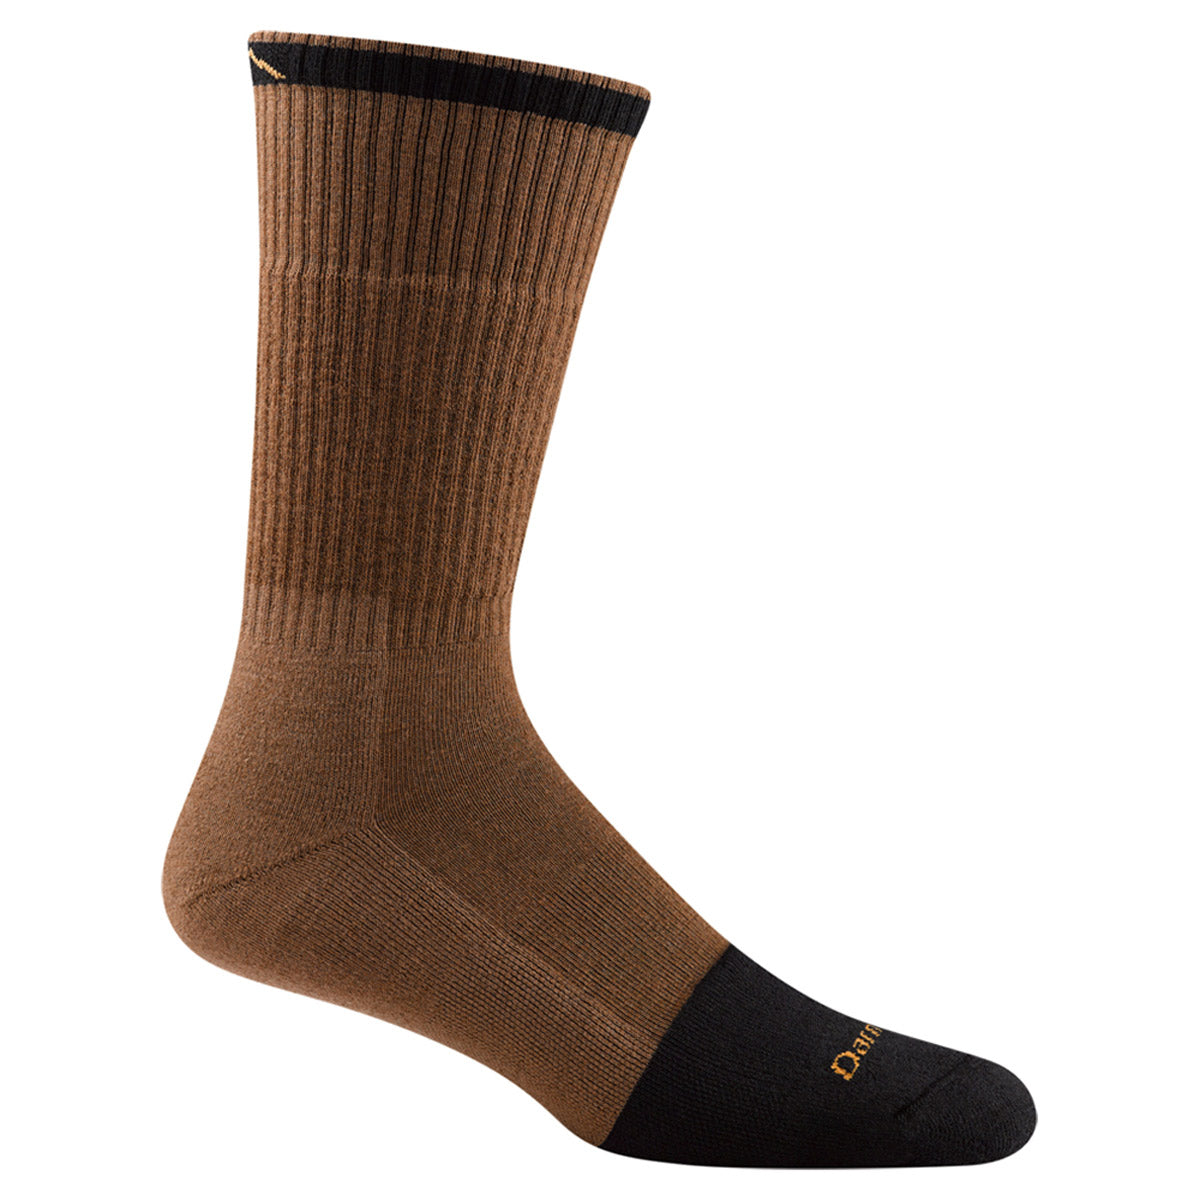 Brown Darn Tough crew sock with a Steely black toe box and logo on a white background, featuring Full Cushion comfort.